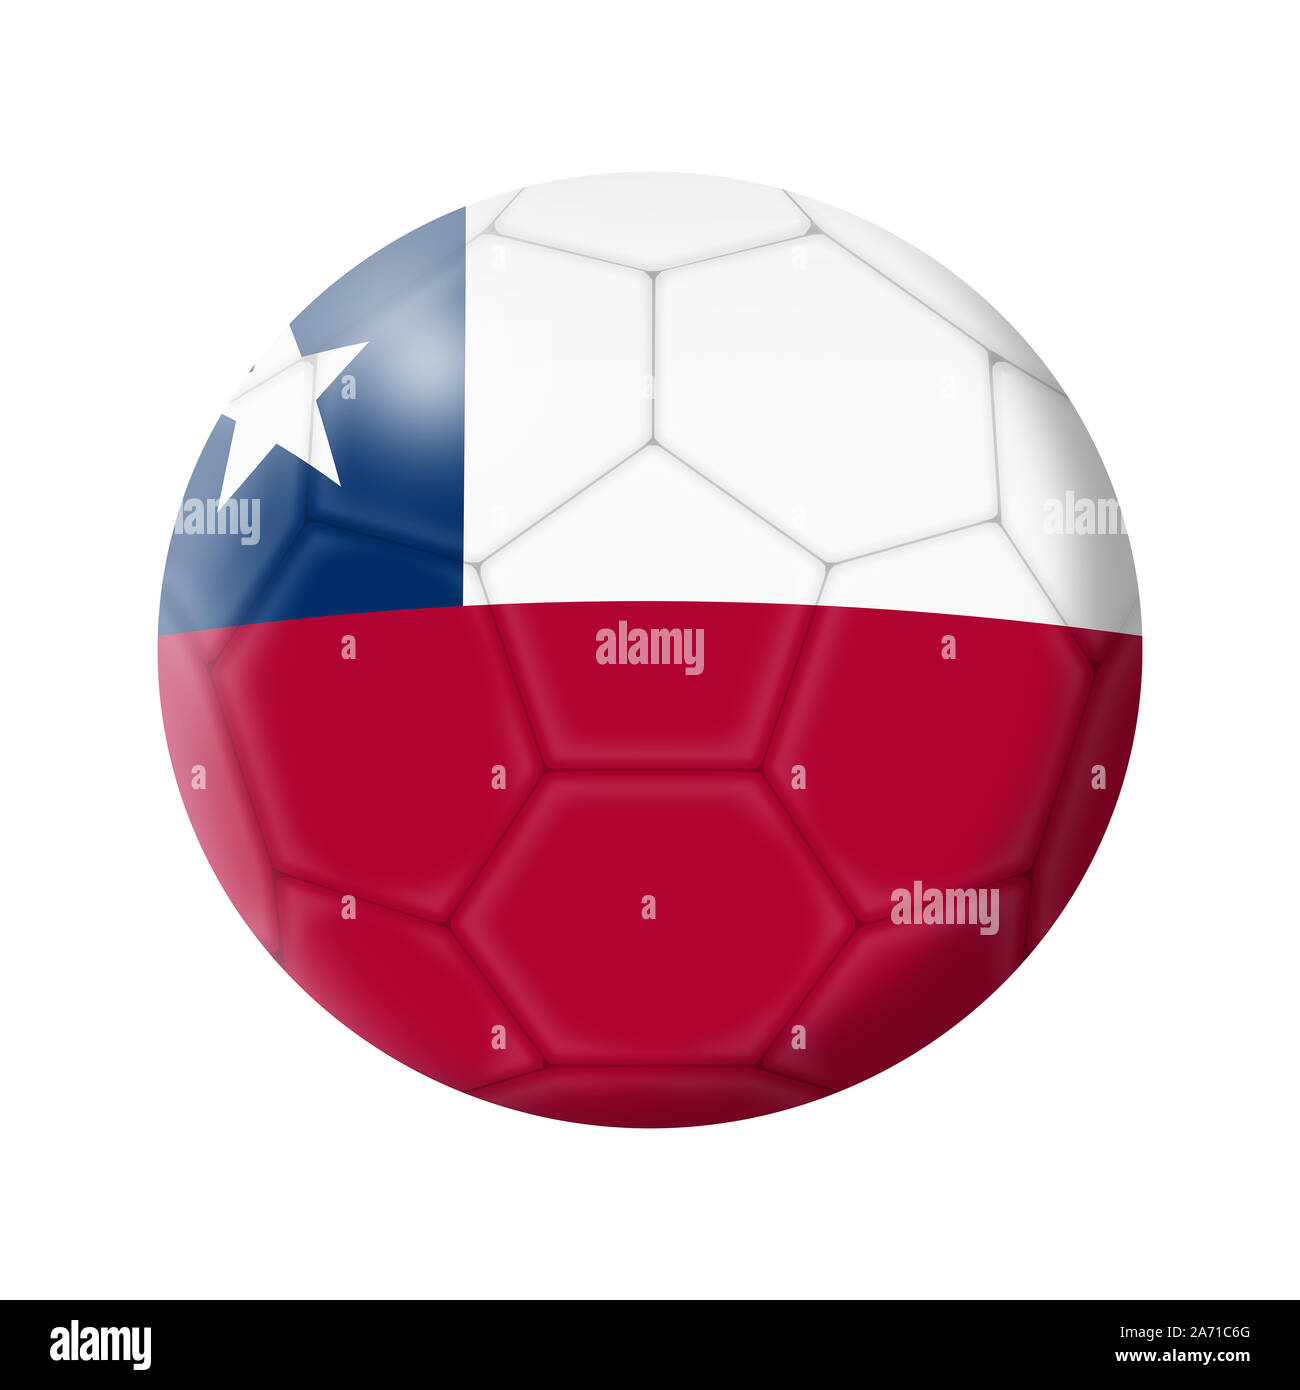 A Chile soccer ball football illustration isolated on white with clipping path Stock Photo